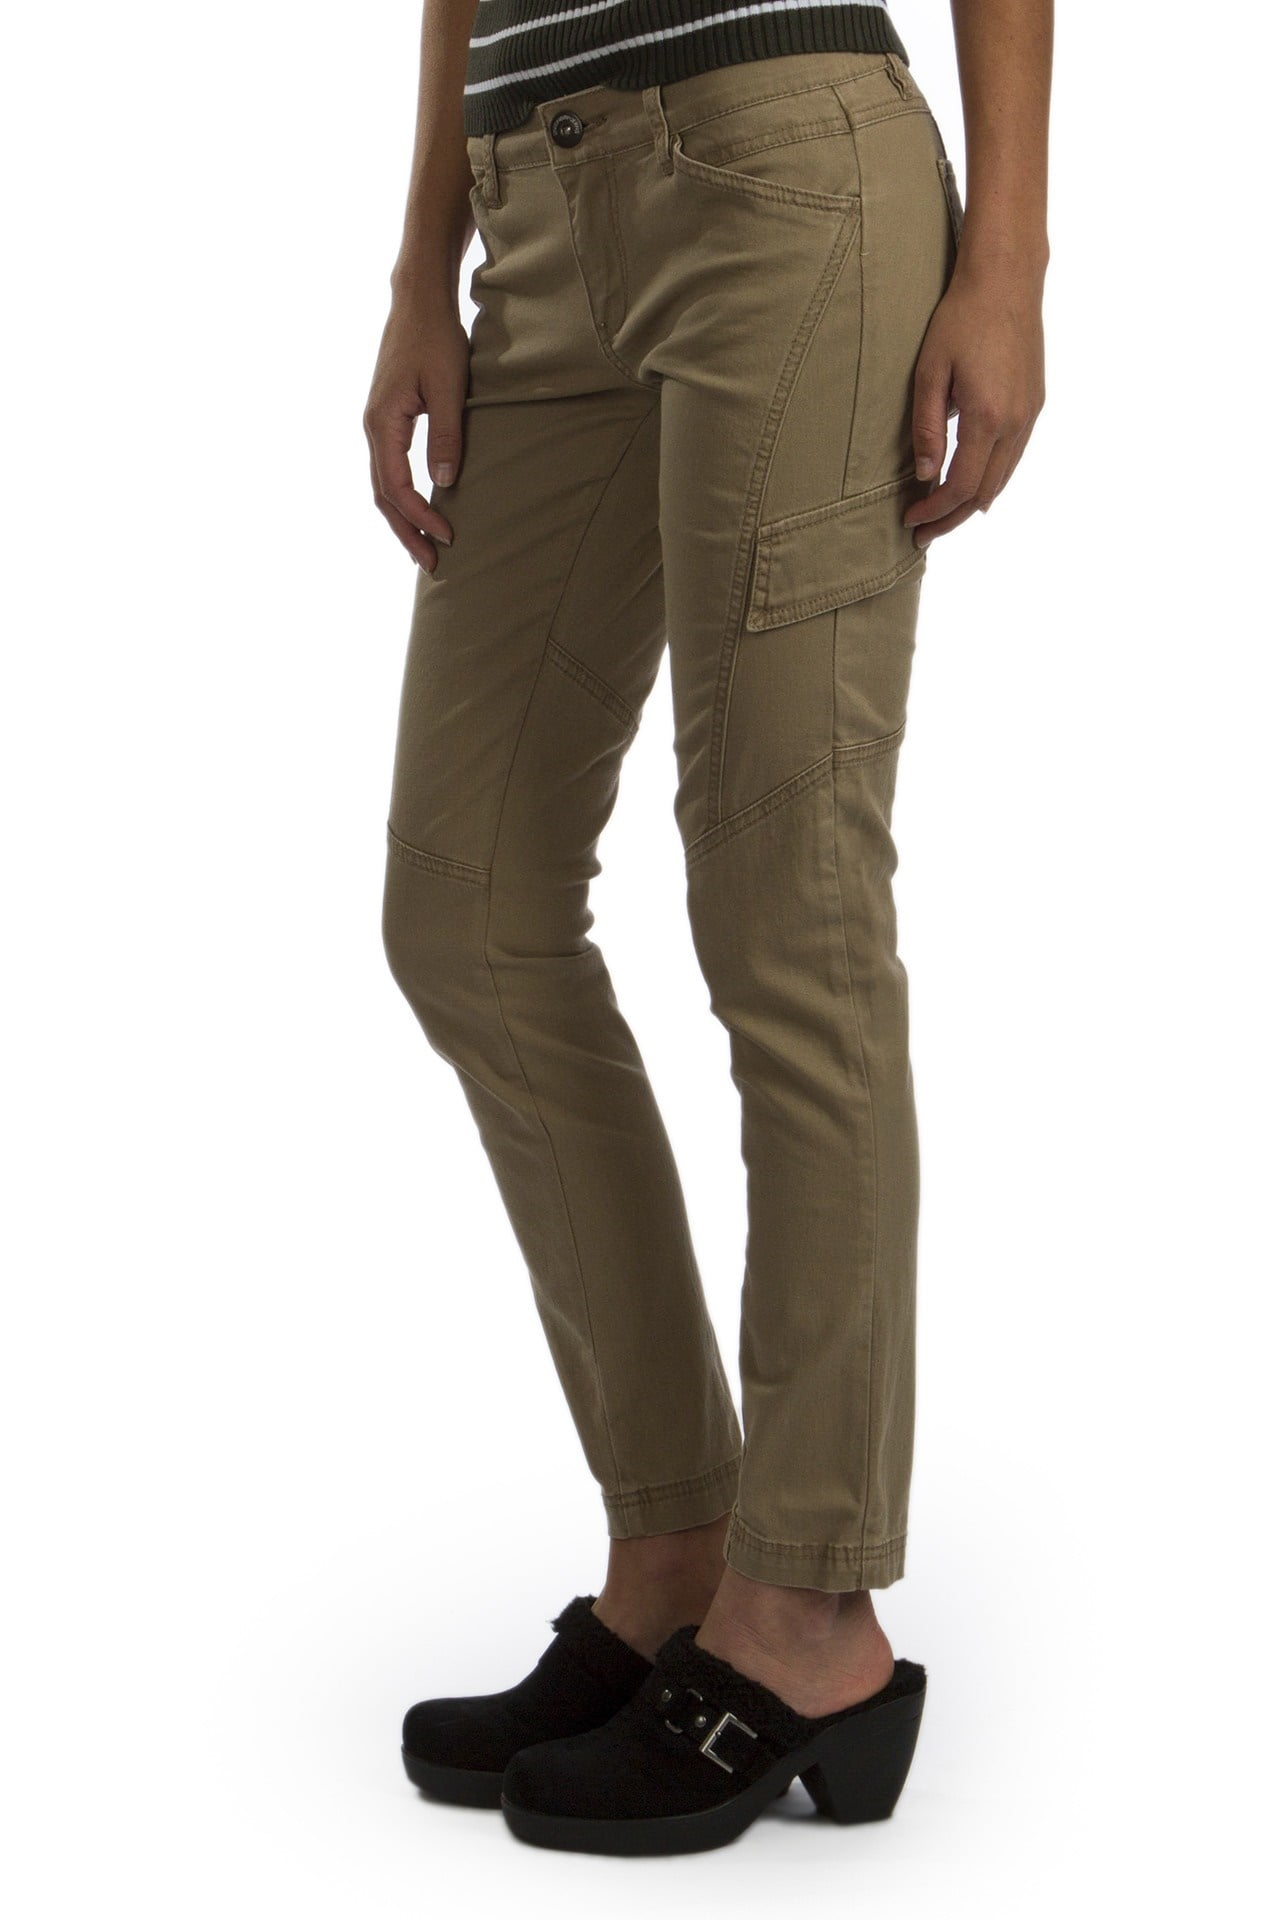 UNIONBAY Men's Survivor Iv Relaxed Fit Cargo Pant-Reg and Big and Tall  Sizes, Golden Brown, 54W / 32L price in UAE | Amazon UAE | kanbkam